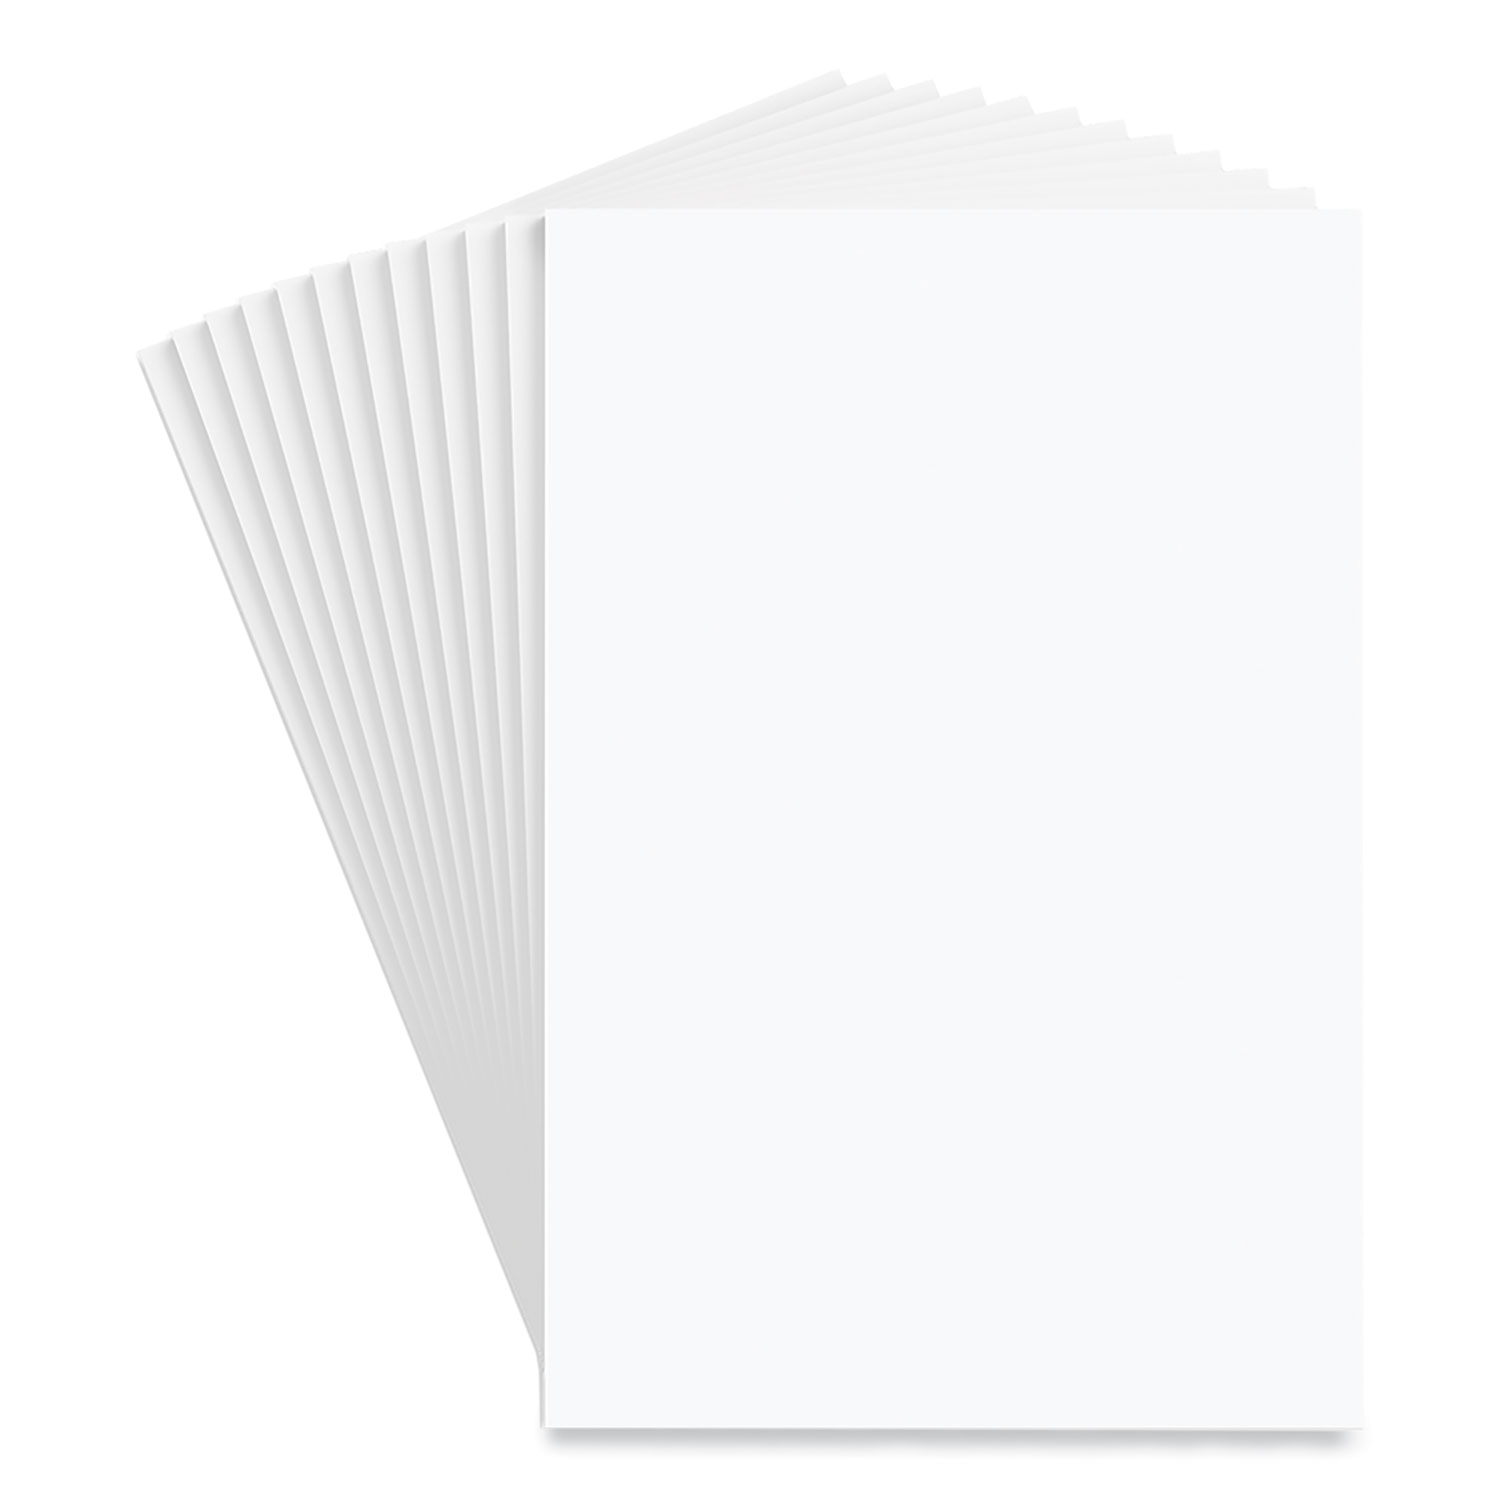 Memo Pads - Note Pads - Scratch Pads - Writing Pads - 10 Pads with 50 -  Apple Forms